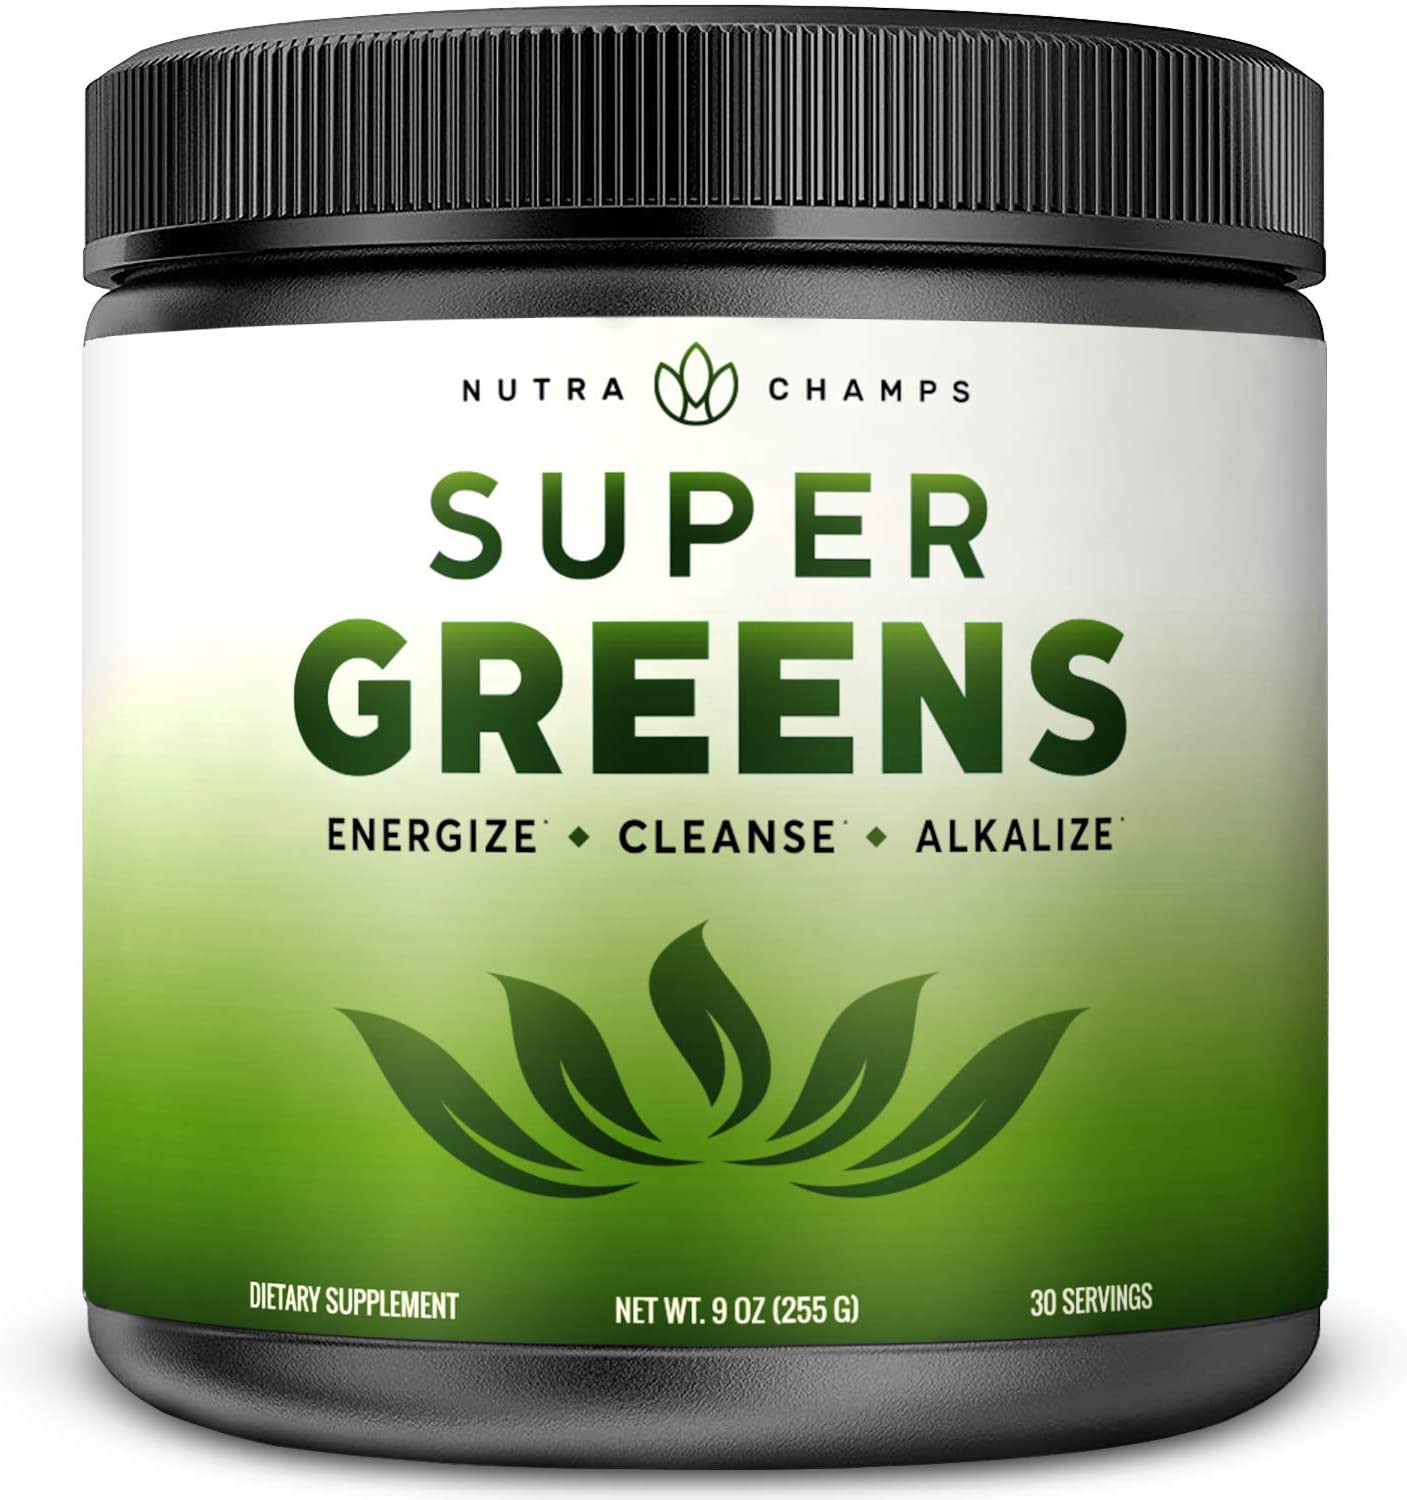 Nutra Champs Super Greens Powder Premium Superfood - Fruit and Vegetable Supplements - Top 10 best Vegetable supplements